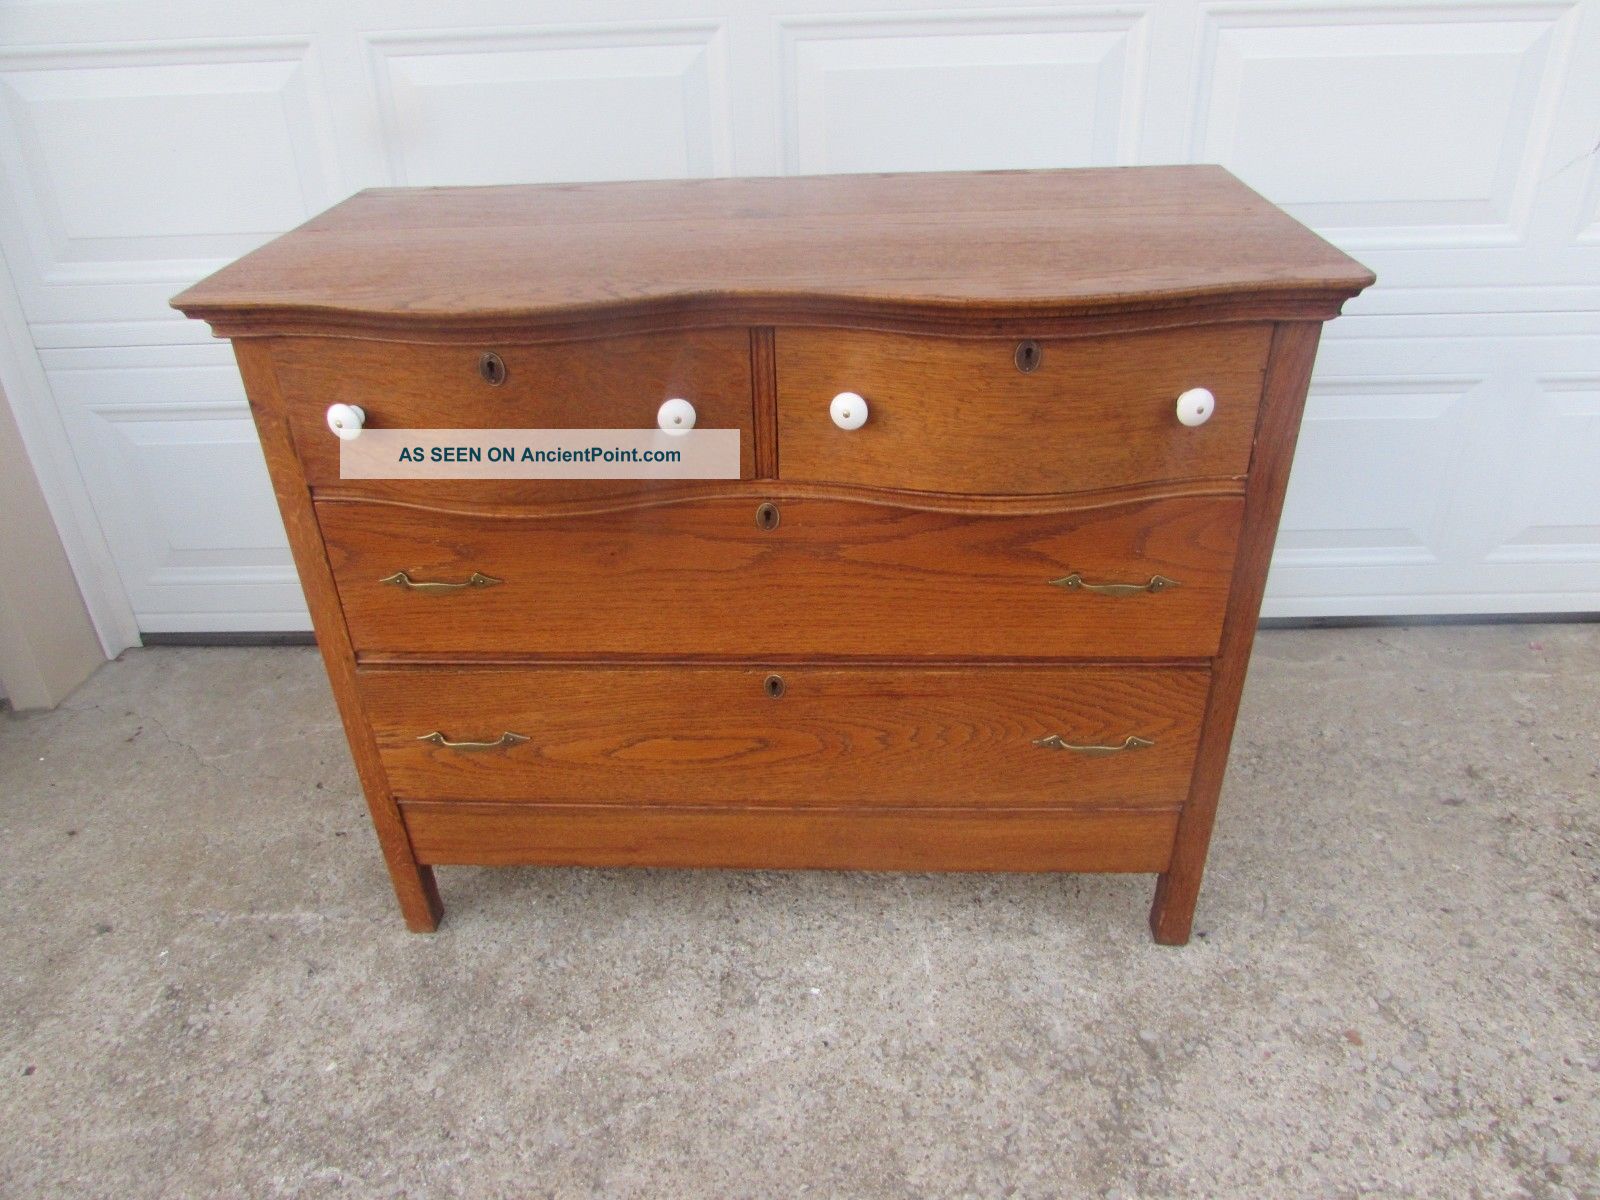 Antique Solid Oak Serpentine Top Chest Of Drawers $2547 1900-1950 photo